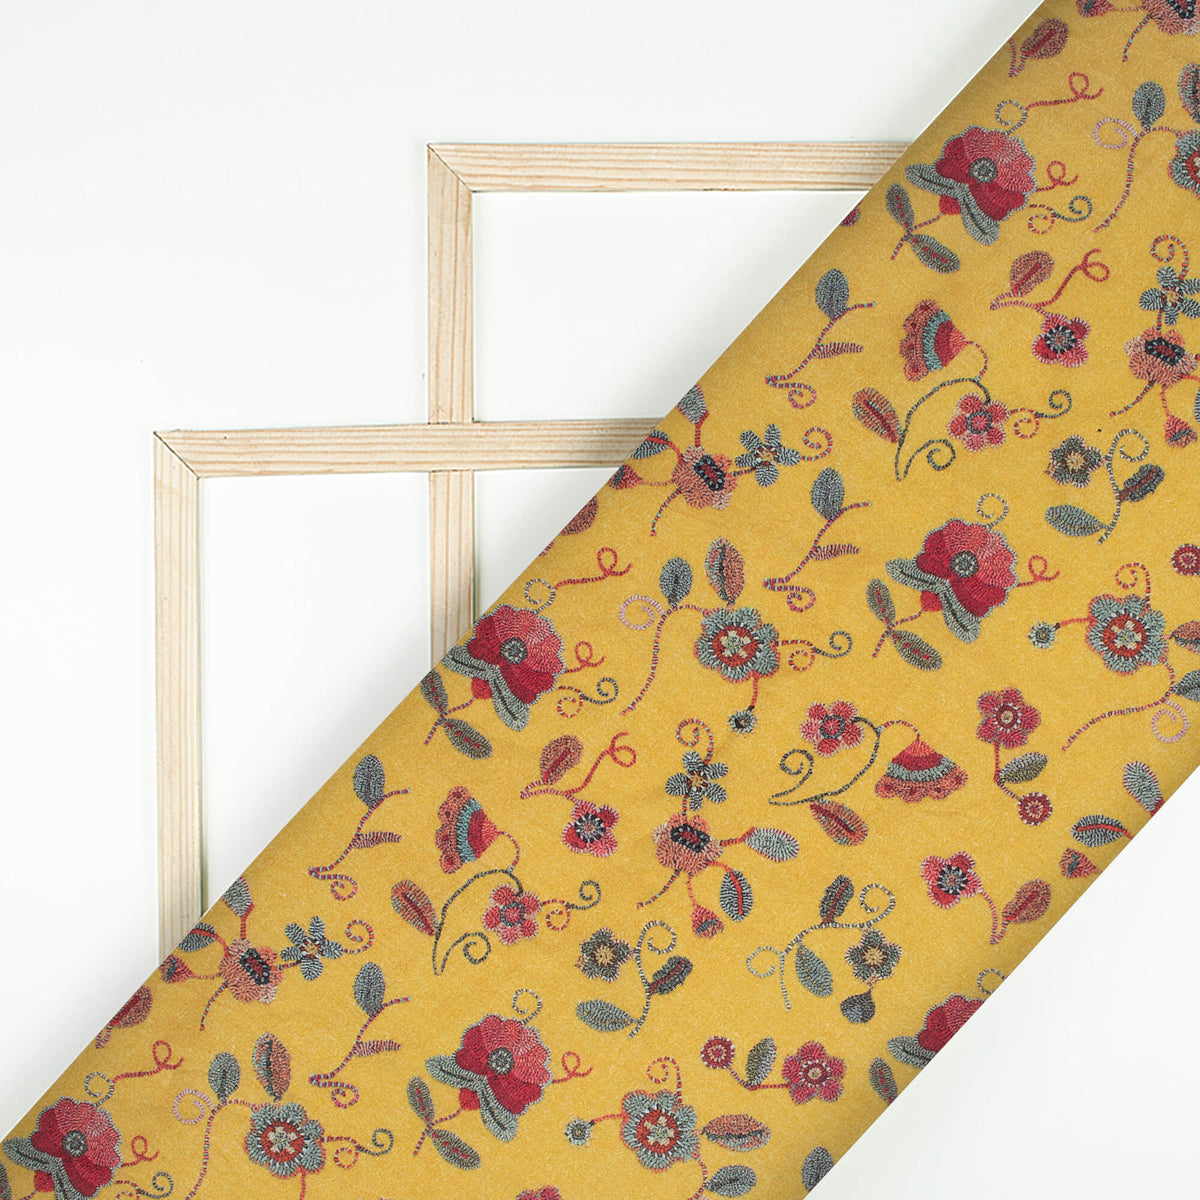 Ochre Yellow And Blood Red Floral Pattern Digital Print Cotton Cambric Fabric